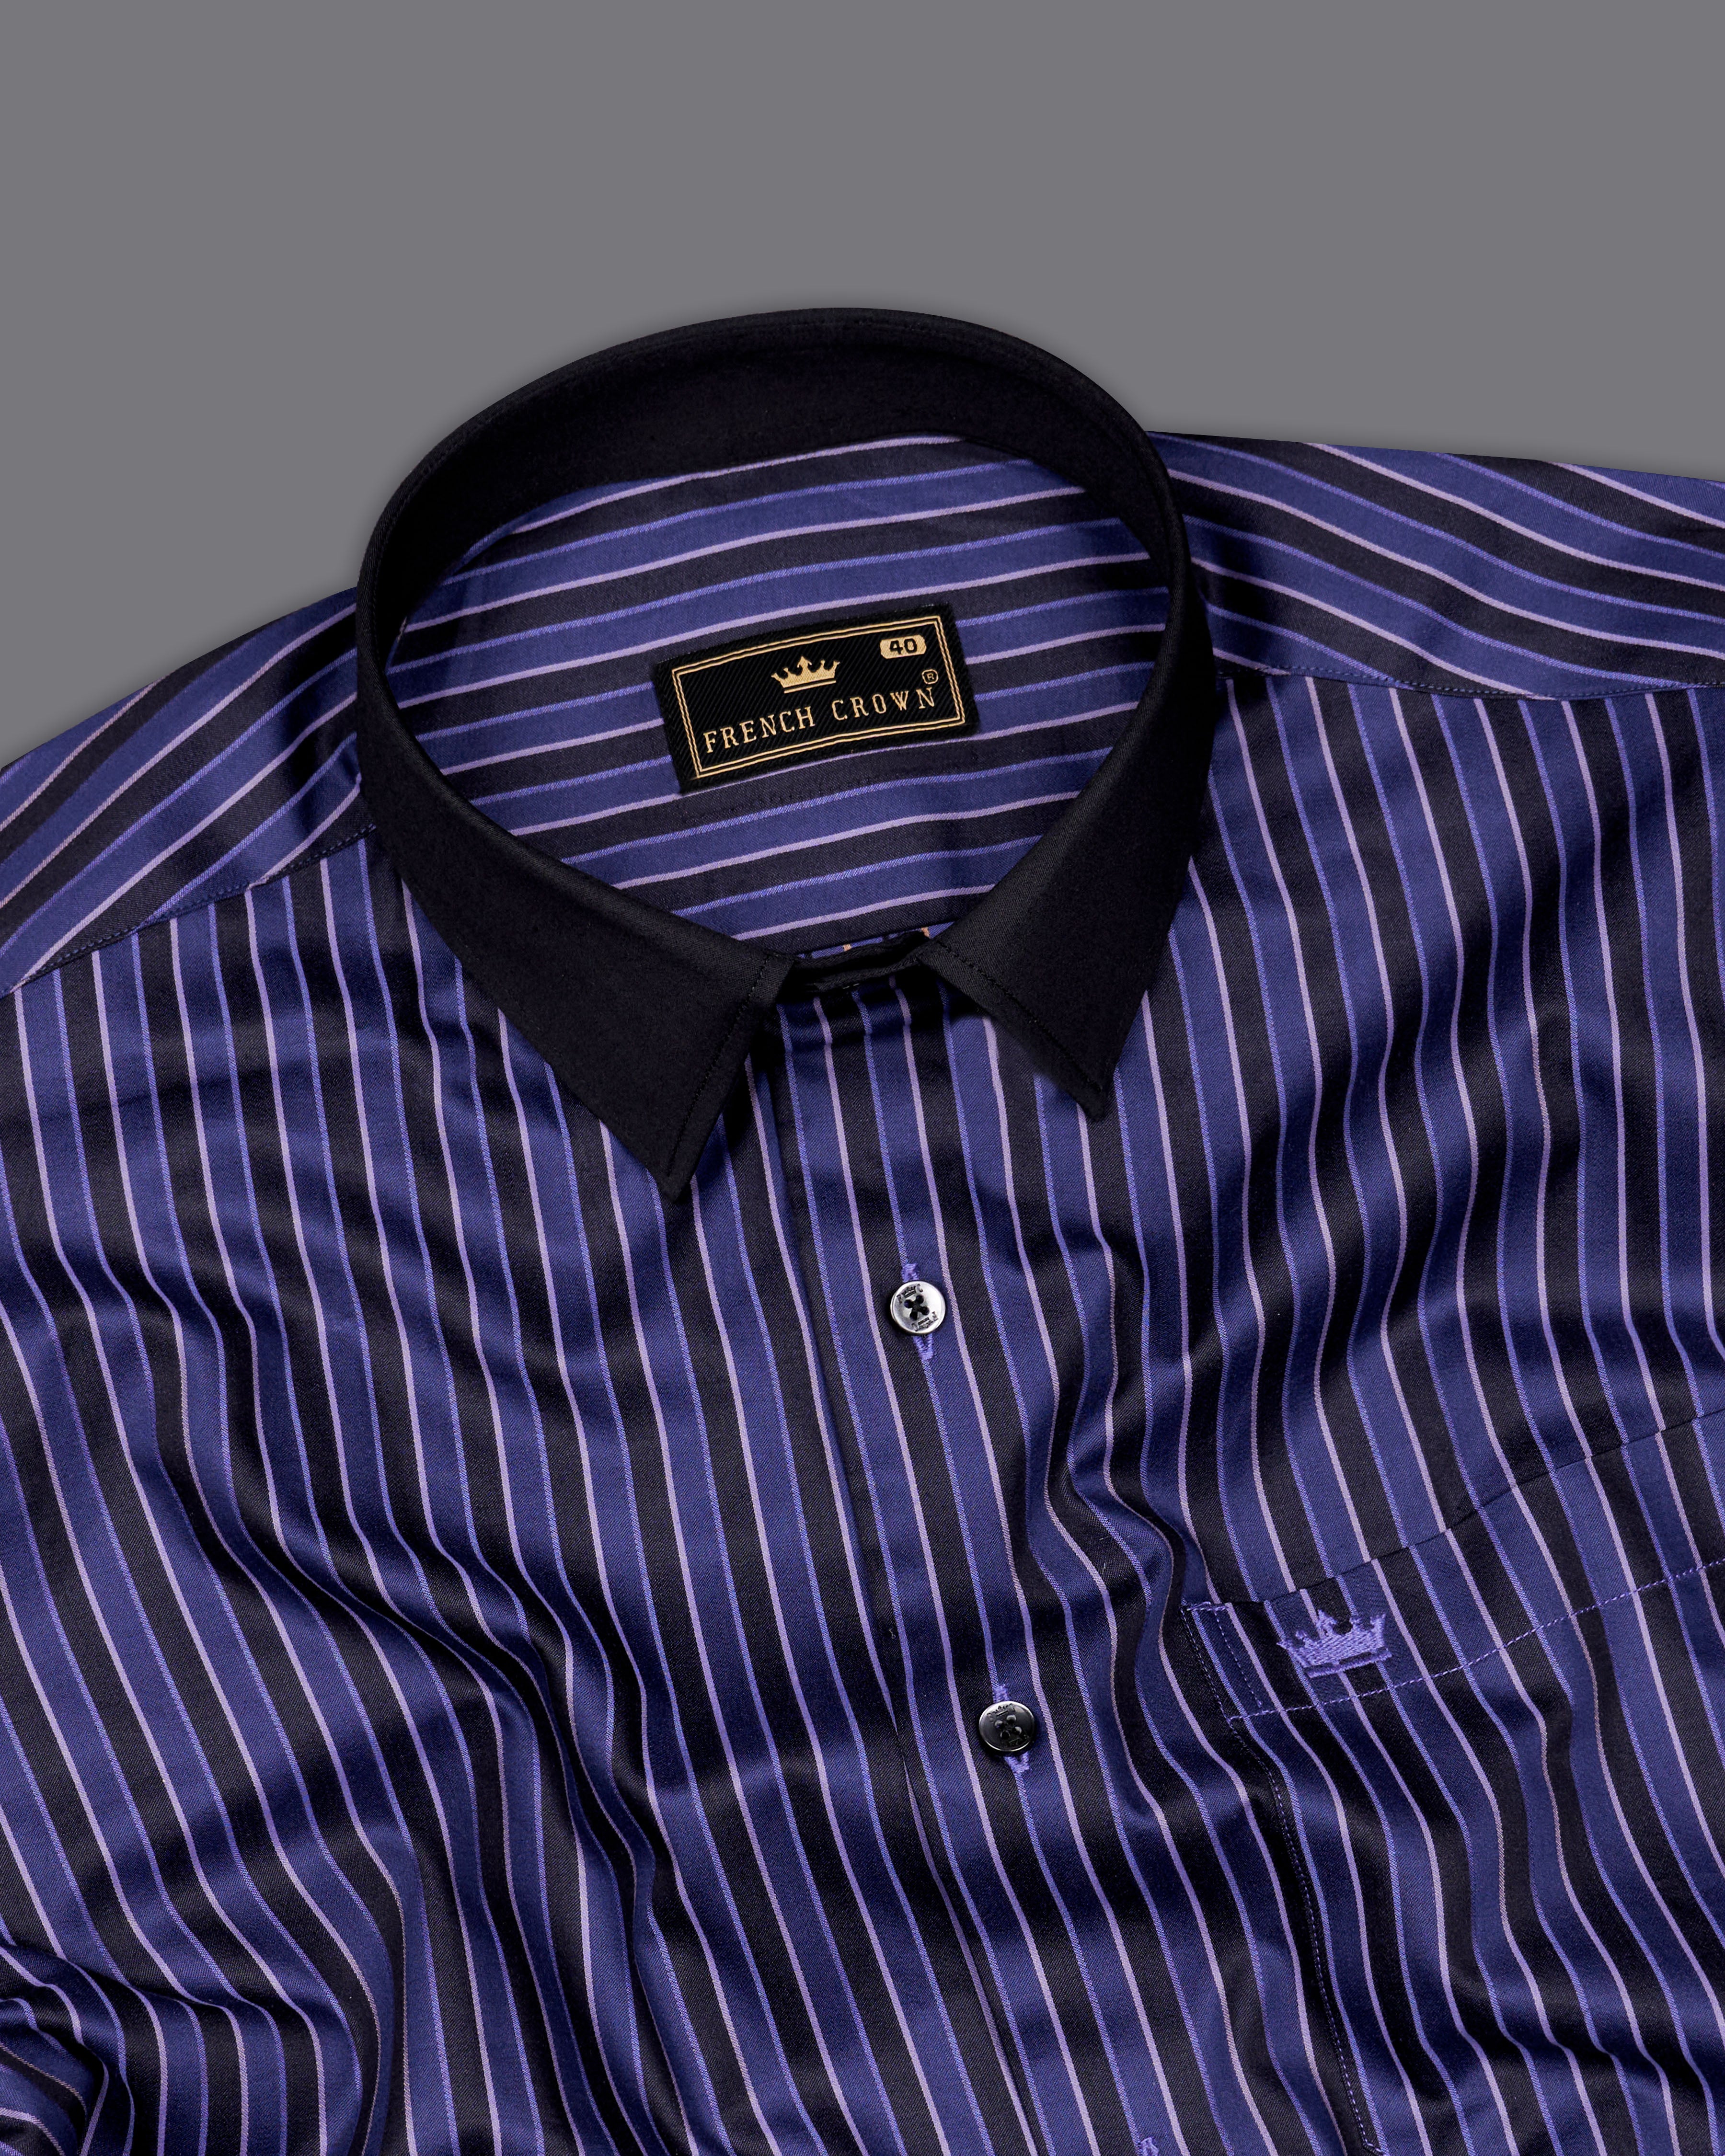 Rhino Blue and and Black Striped Dobby Textured Premium Giza Cotton Shirt 9613-BLK-BCC-38,9613-BLK-BCC-H-38,9613-BLK-BCC-39,9613-BLK-BCC-H-39,9613-BLK-BCC-40,9613-BLK-BCC-H-40,9613-BLK-BCC-42,9613-BLK-BCC-H-42,9613-BLK-BCC-44,9613-BLK-BCC-H-44,9613-BLK-BCC-46,9613-BLK-BCC-H-46,9613-BLK-BCC-48,9613-BLK-BCC-H-48,9613-BLK-BCC-50,9613-BLK-BCC-H-50,9613-BLK-BCC-52,9613-BLK-BCC-H-52